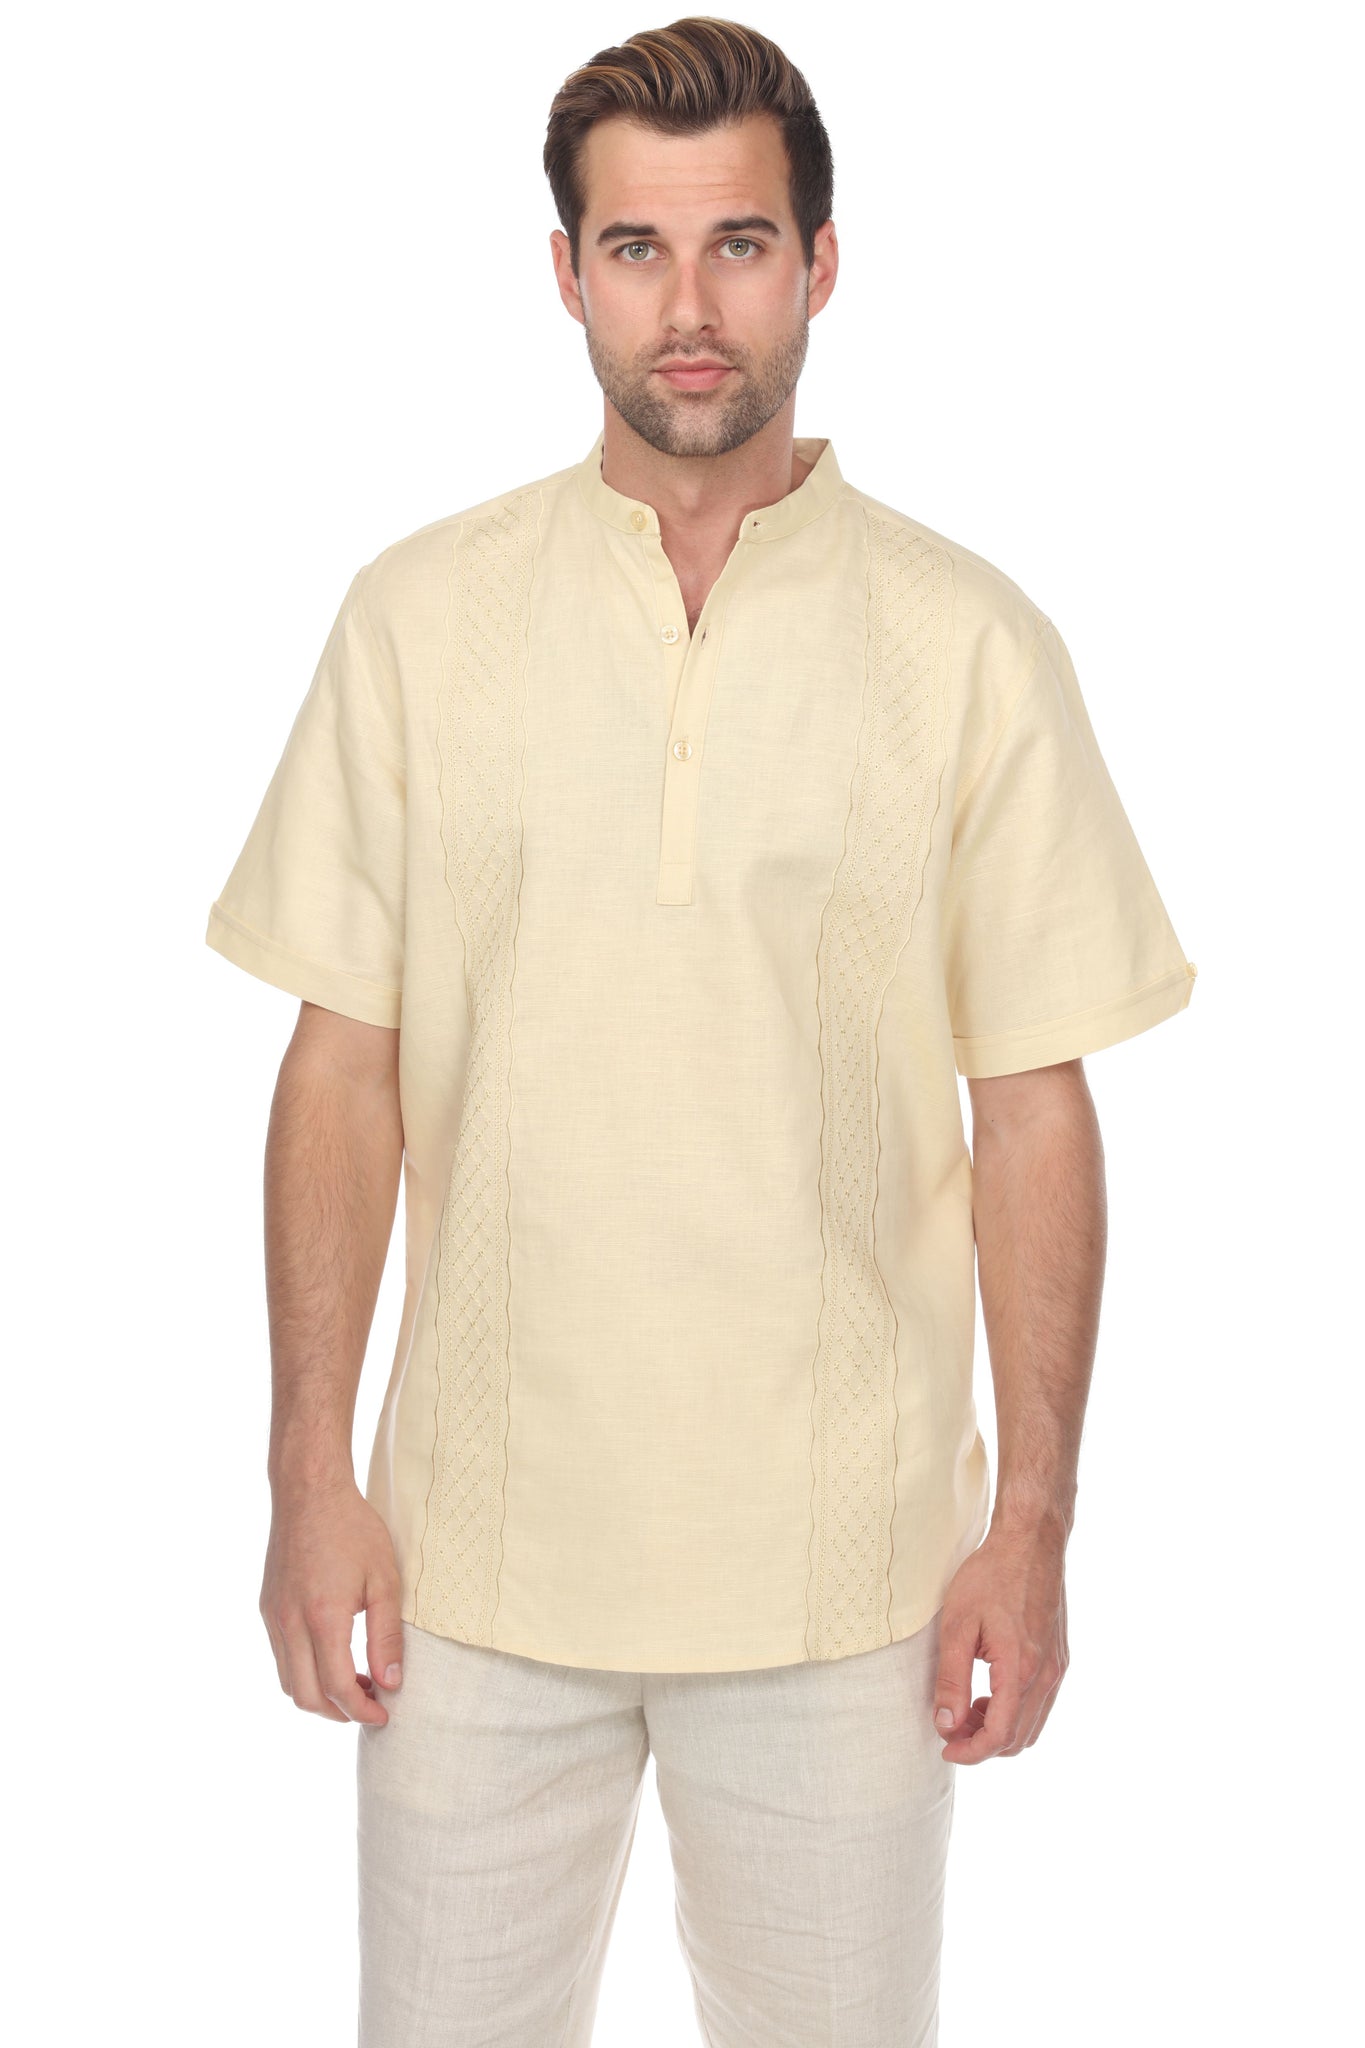 Casual Linen Blend Mandarin Collar Stitched Embroidery Henley Short Sleeve Shirt - Mojito Collection - Beachwear, Mens Shirt, Mojito Linen Shirt, Resort Wear, Short Sleeve Linen Shirt, Short 